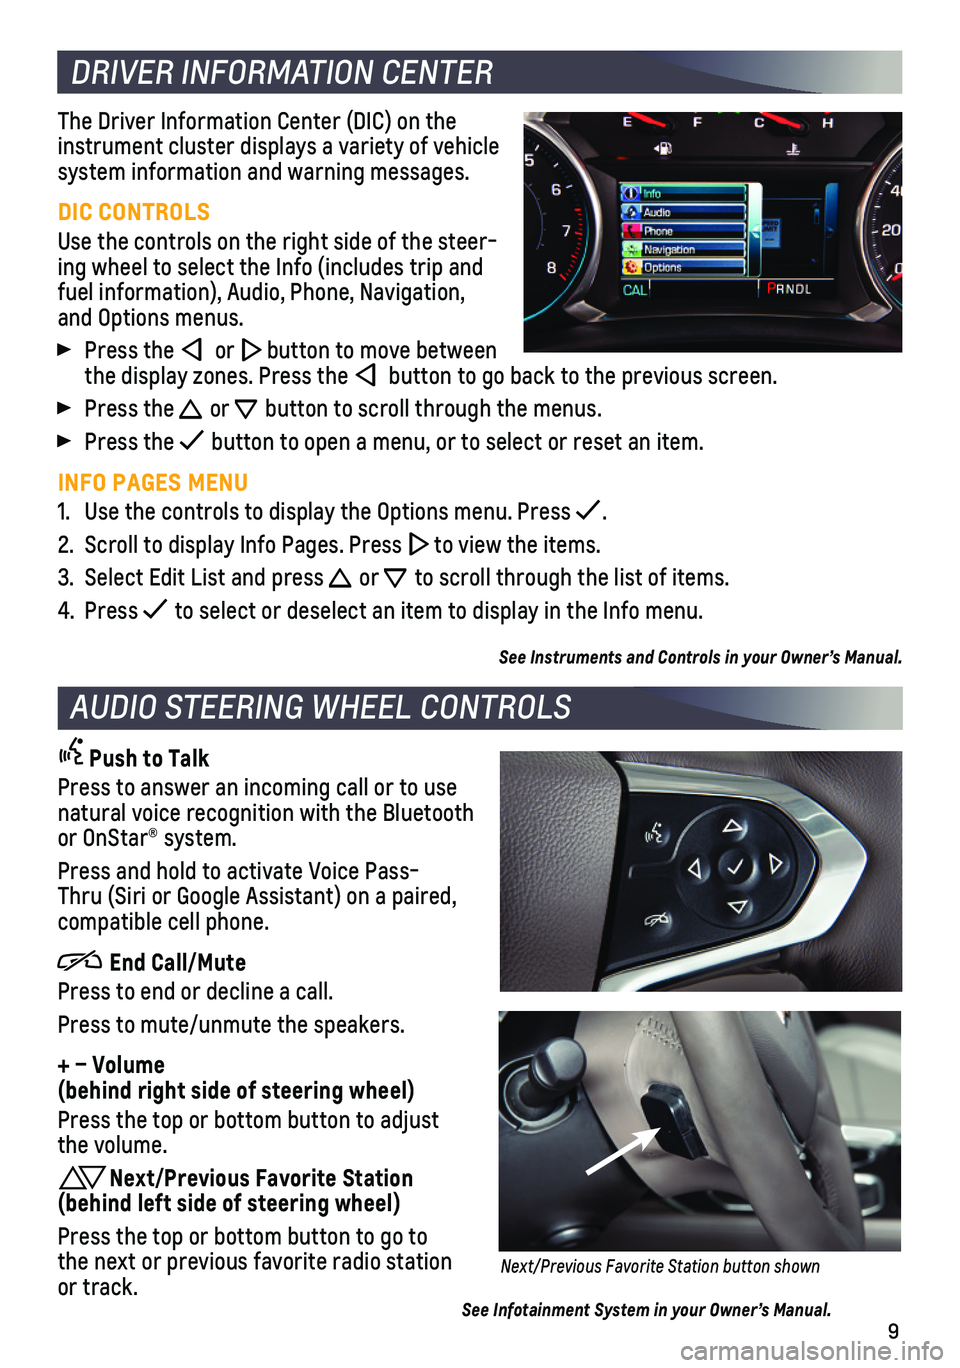 CHEVROLET TRAVERSE 2021  Get To Know Guide 9
DRIVER INFORMATION CENTER
The Driver Information Center (DIC) on the instrument cluster displays a variety of vehicle system information and warning messages.
DIC CONTROLS
Use the controls on the ri